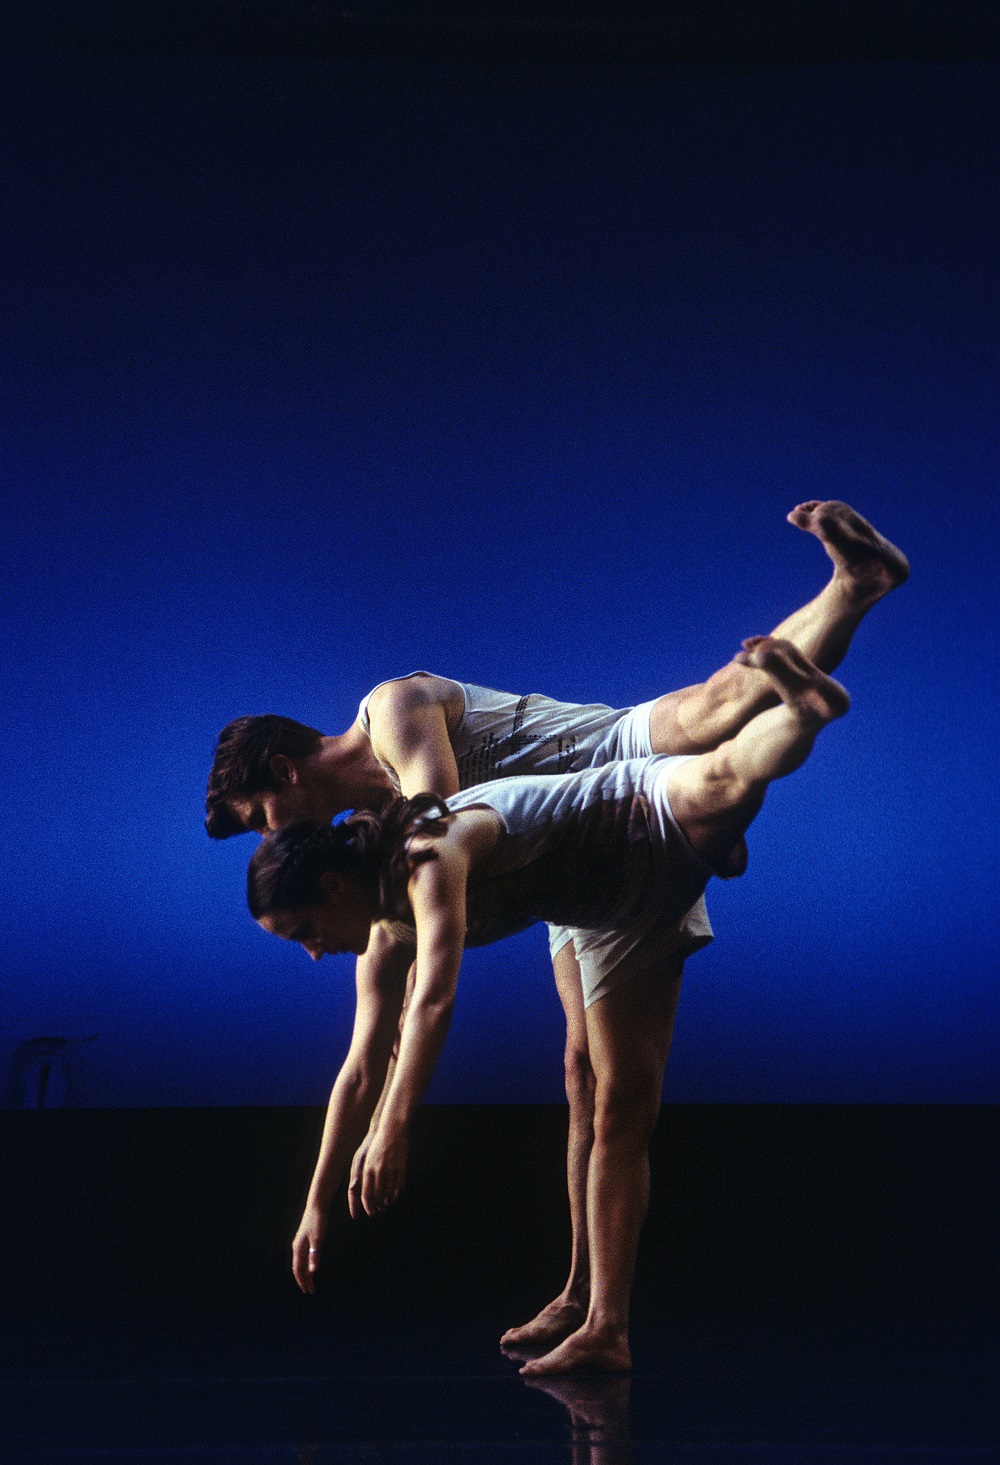 Nancy Karp + Dancers’ Archive now at The Bancroft Library